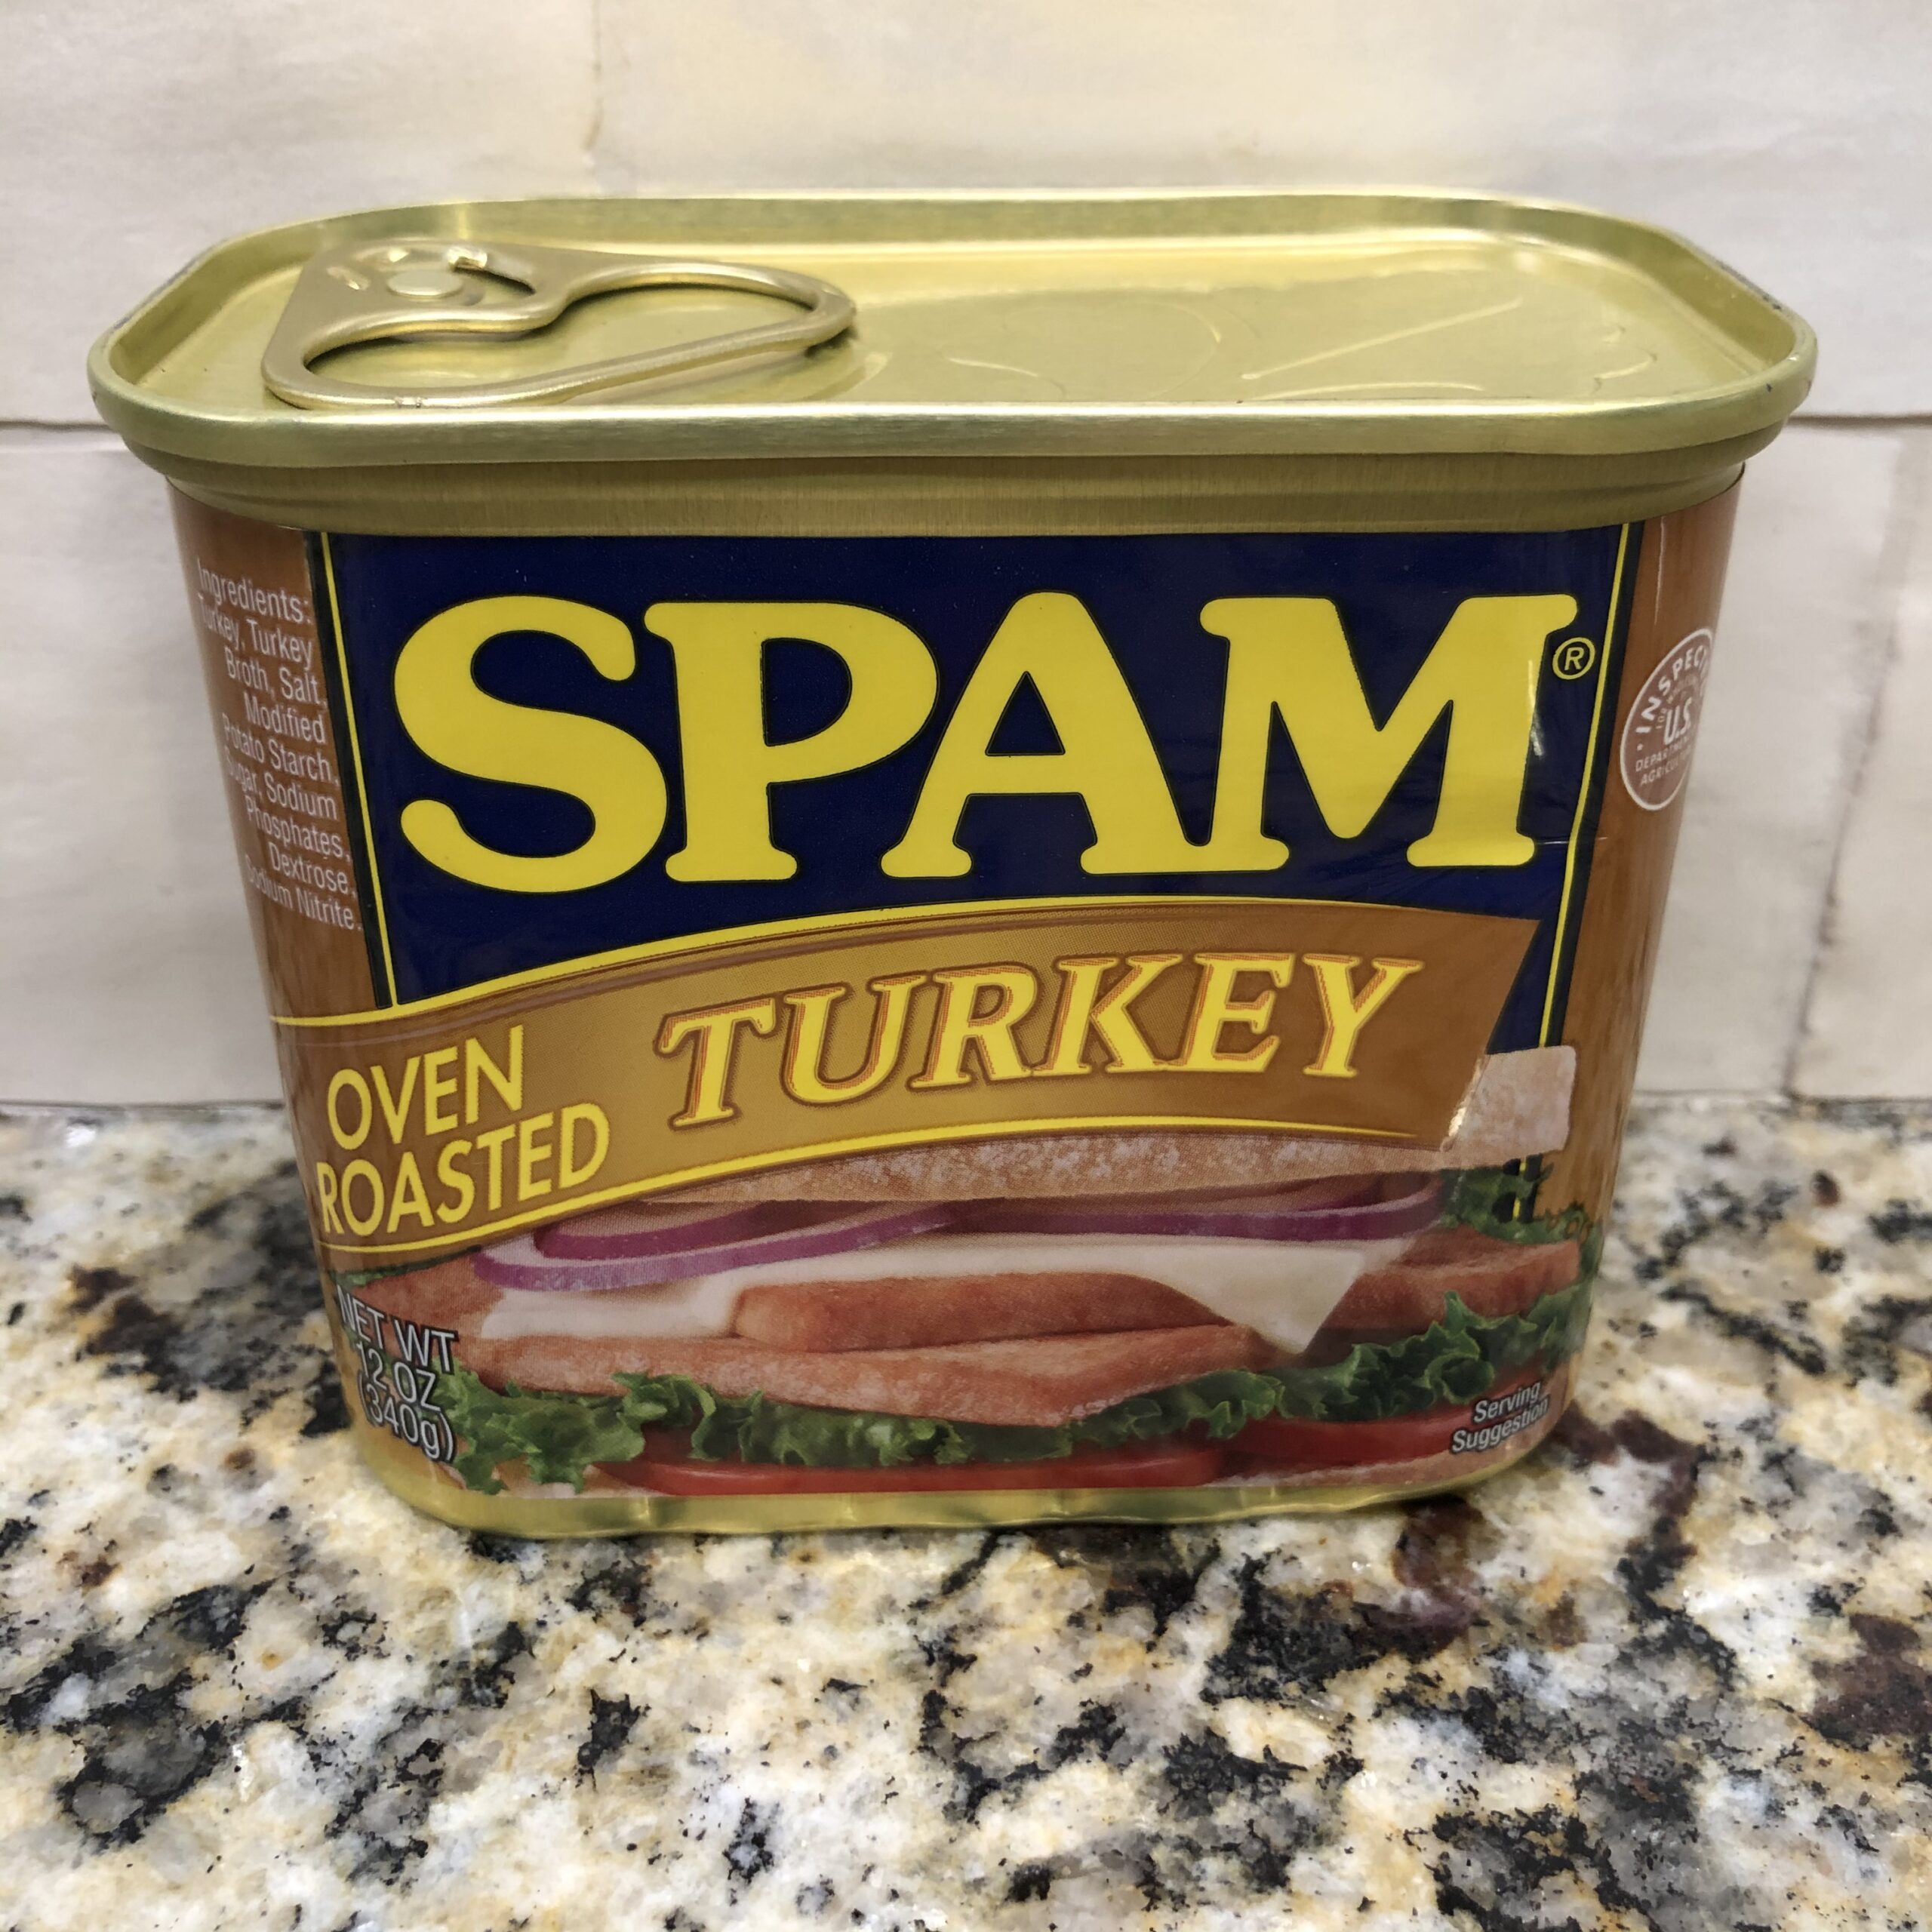 Spam Oven Roasted Turkey, 12 Ounce Can